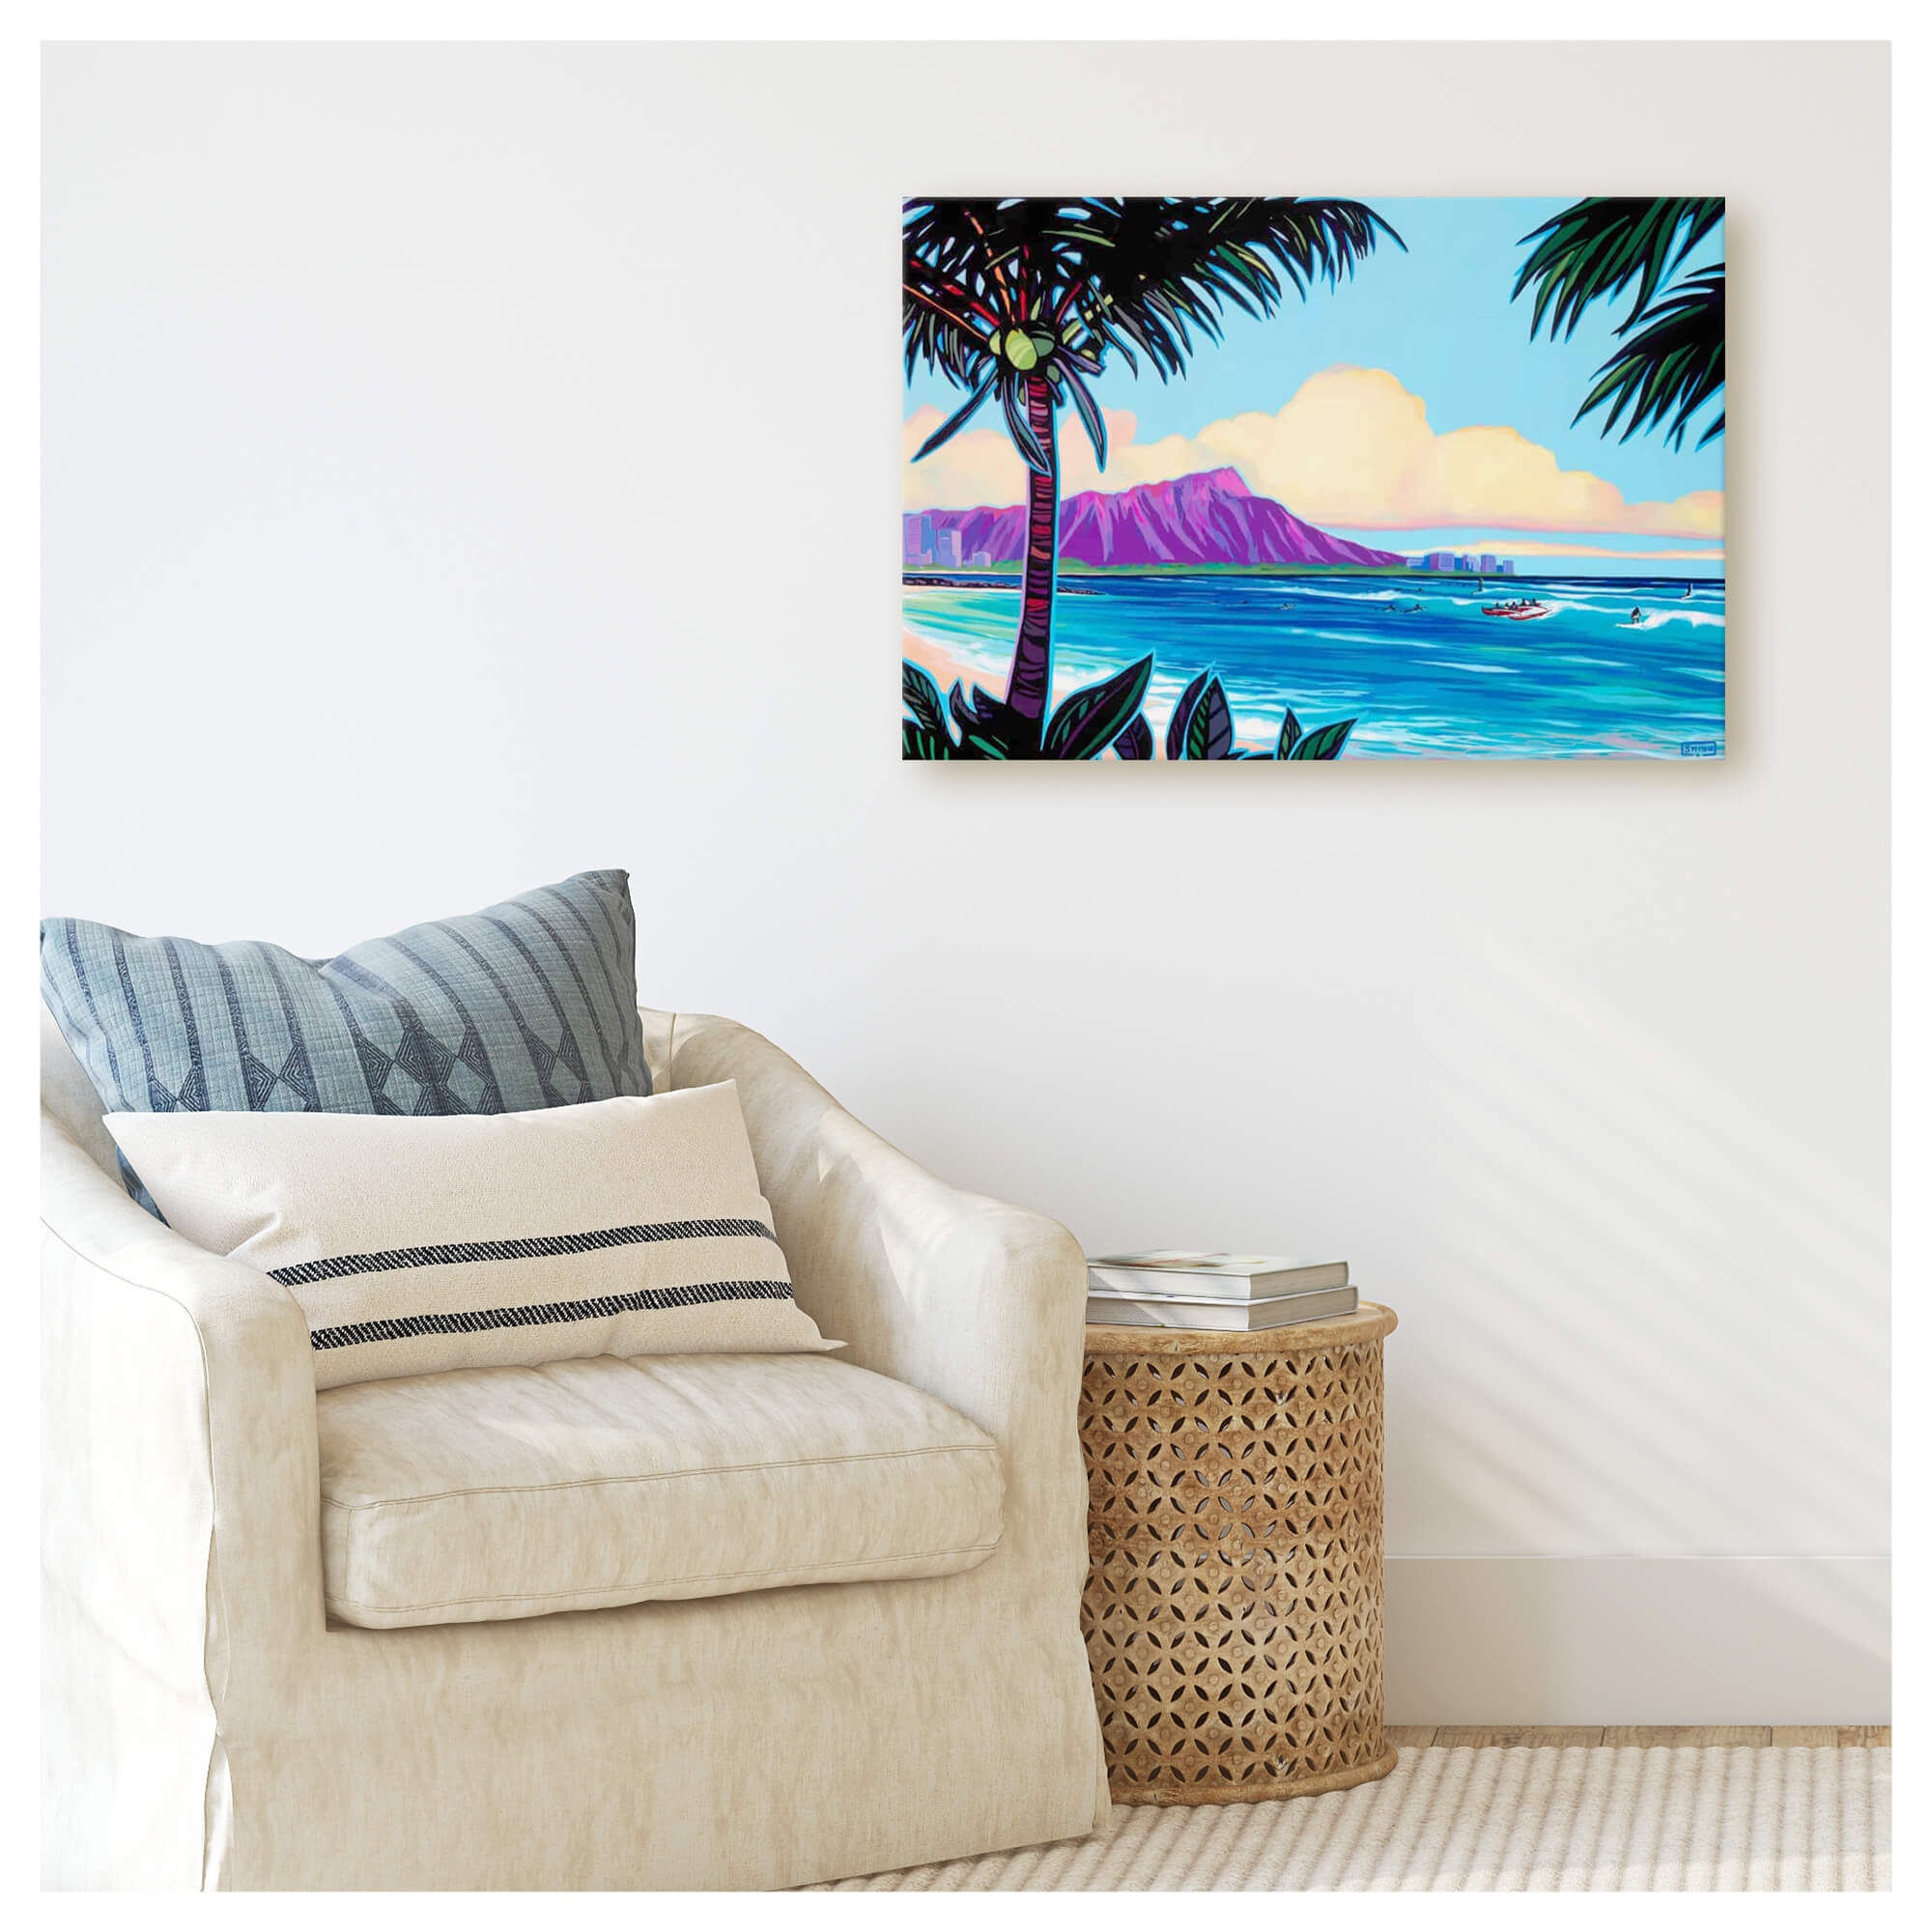 A canvas giclée print of Diamond Head Crater as surfers and outrigger paddlers enjoy the waves at its forefront by Hawaii artist Christie Shinn